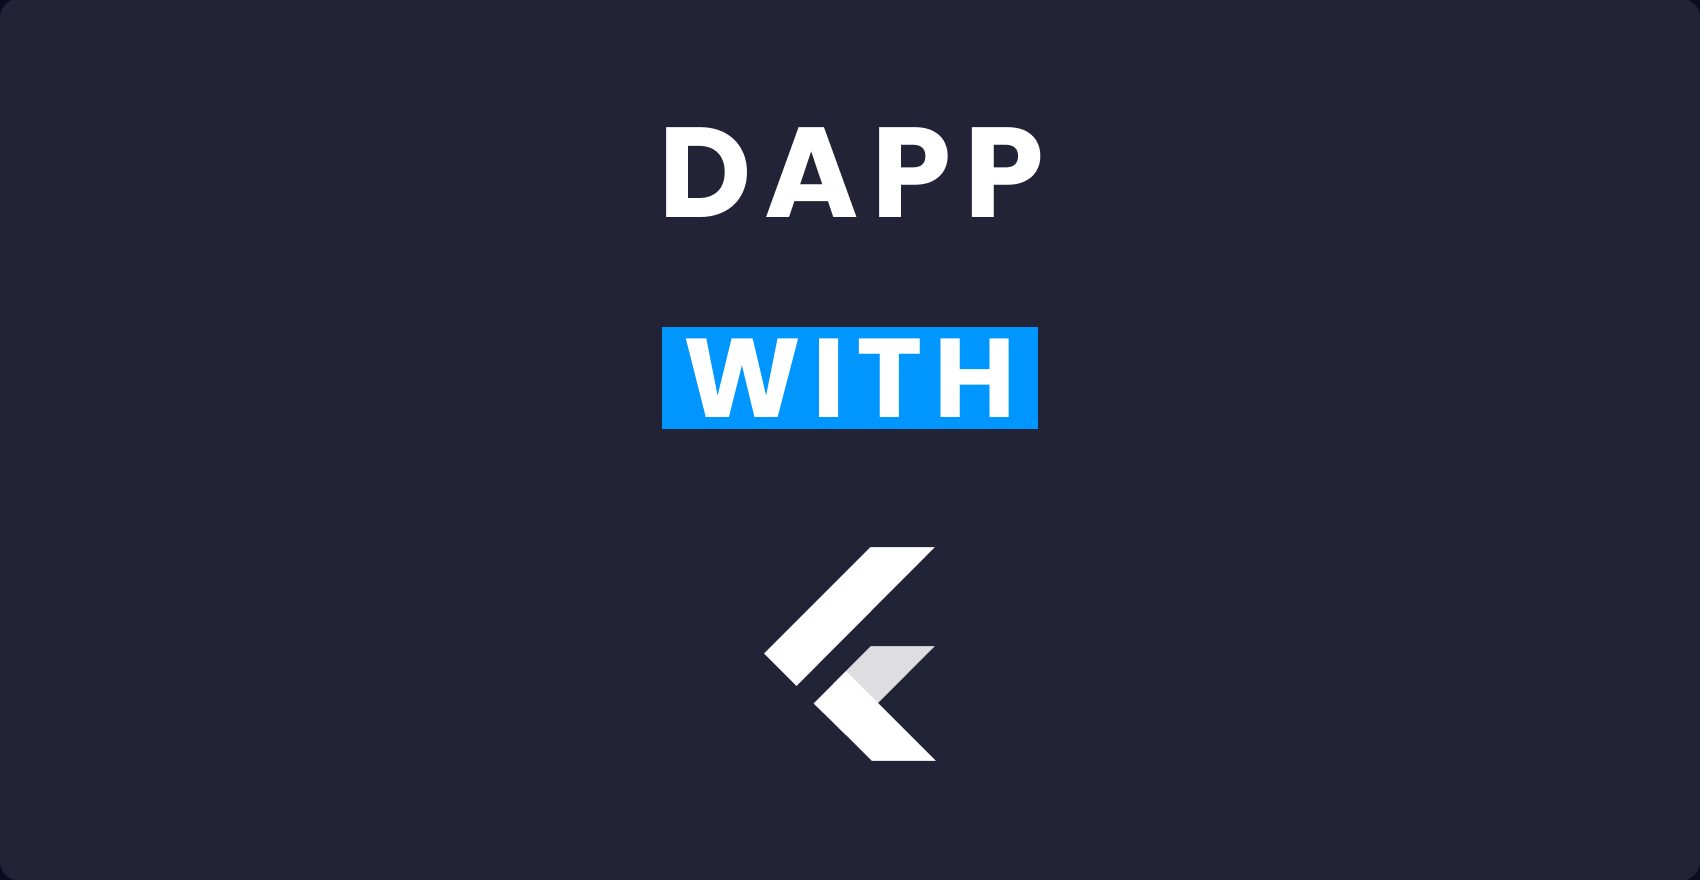 How to Create Dapp With Flutter: Avoid-Pitfalls Guide